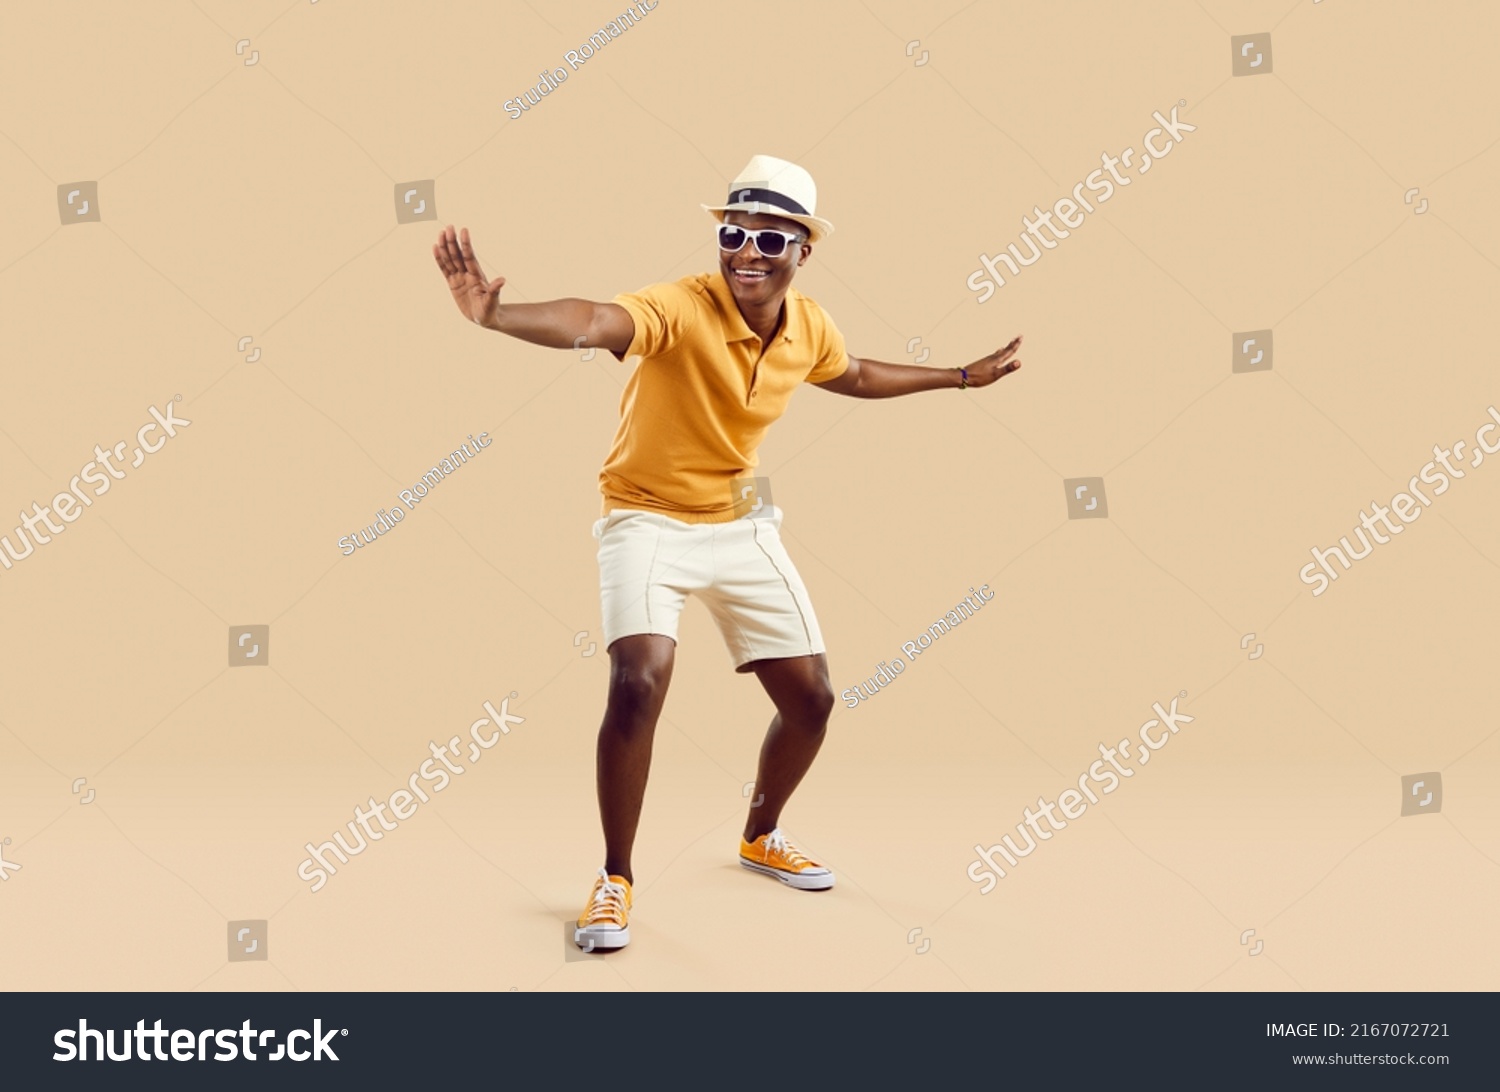 Cheerful stylish african american man having fun dancing on light beige background. Funny smiling dark skinned man in sneakers, shorts, polo shirt and hat with sunglasses. Full length. Banner. #2167072721